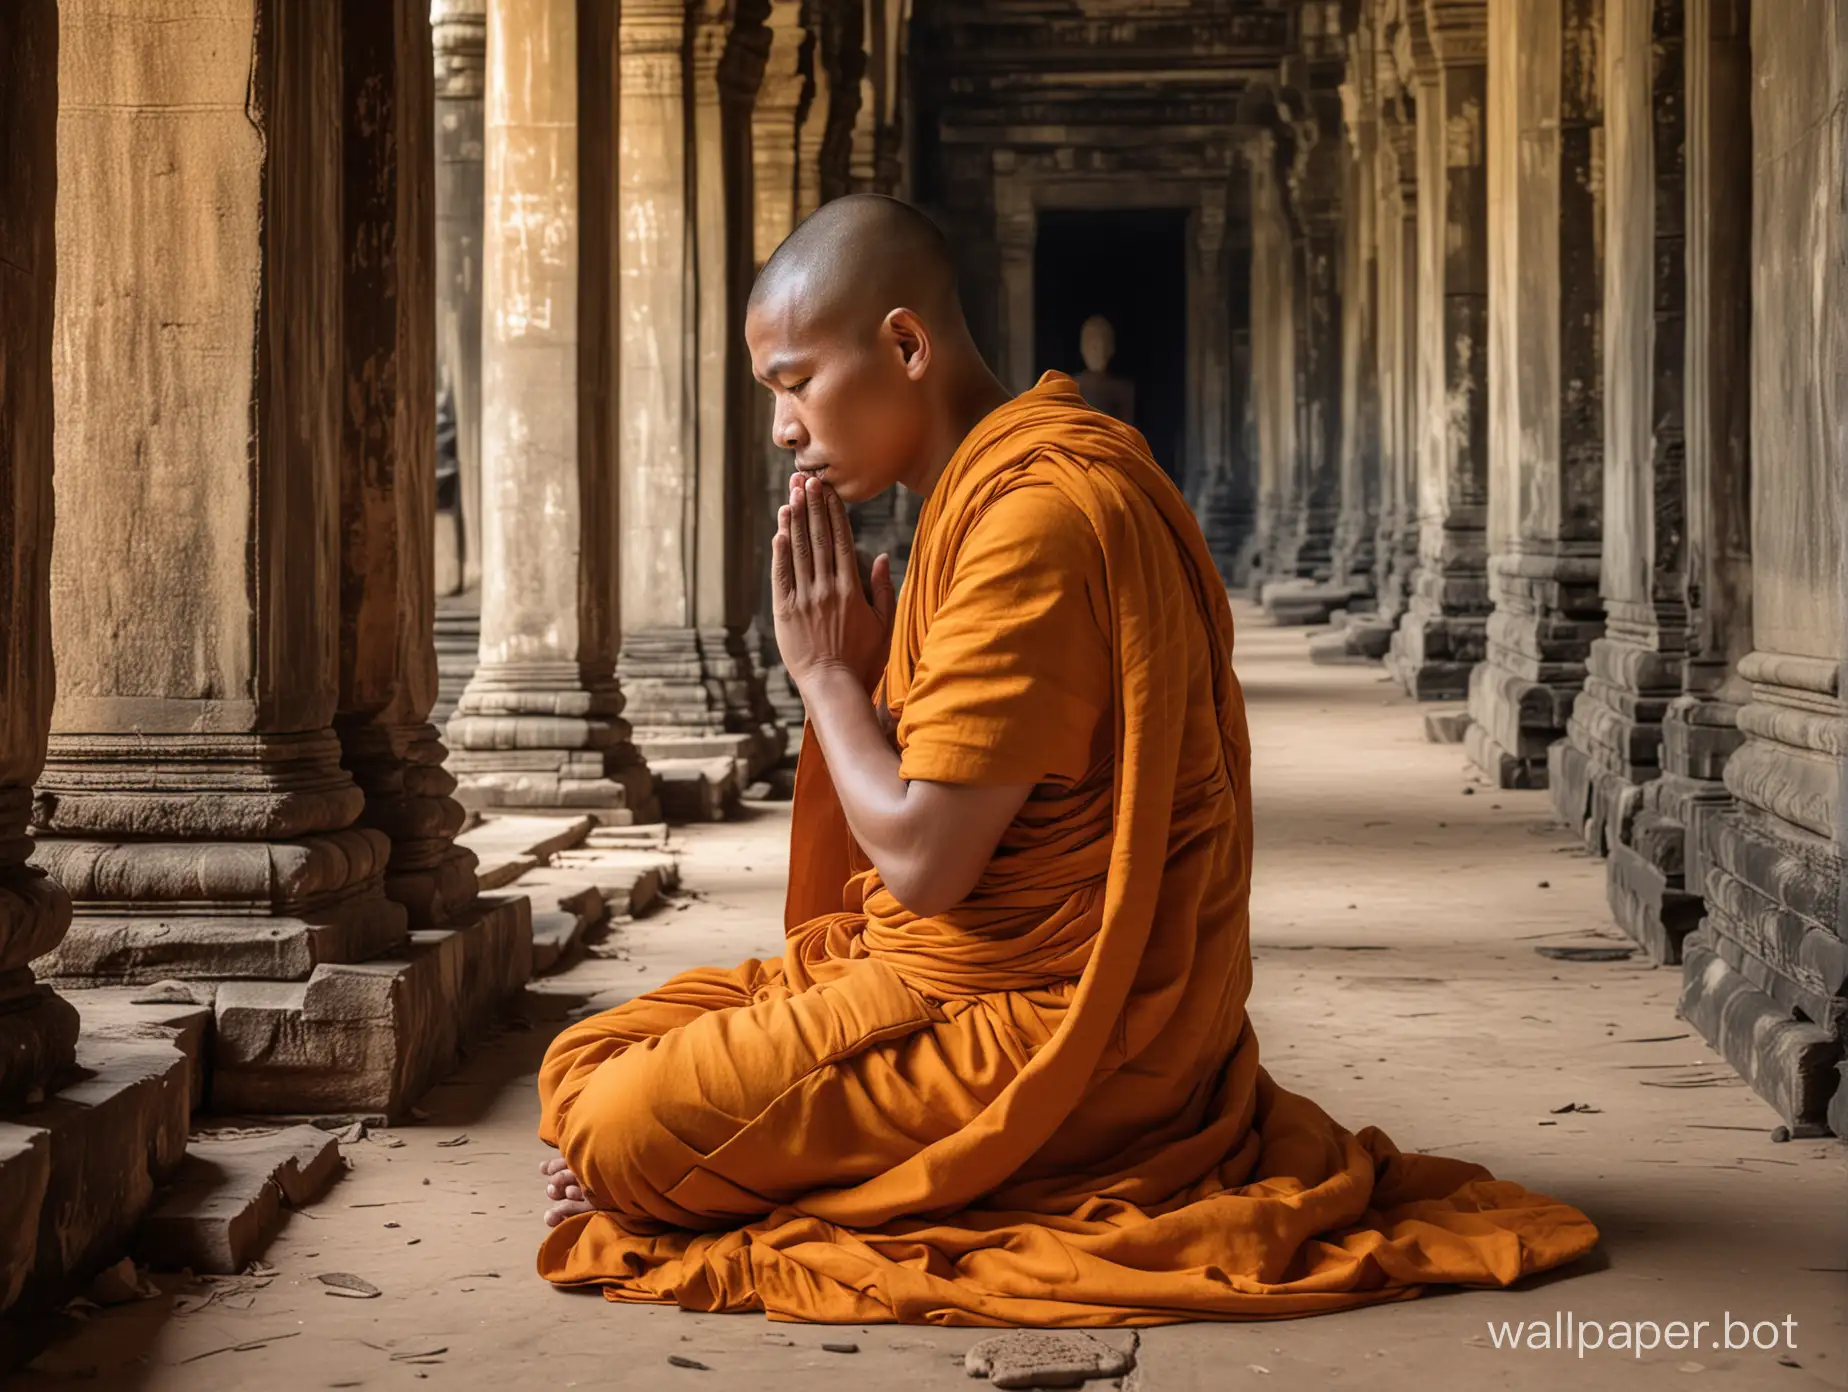 Cambodian-Monk-in-Meditation-at-Angkor-Wat-with-Detailed-Full-Body-View